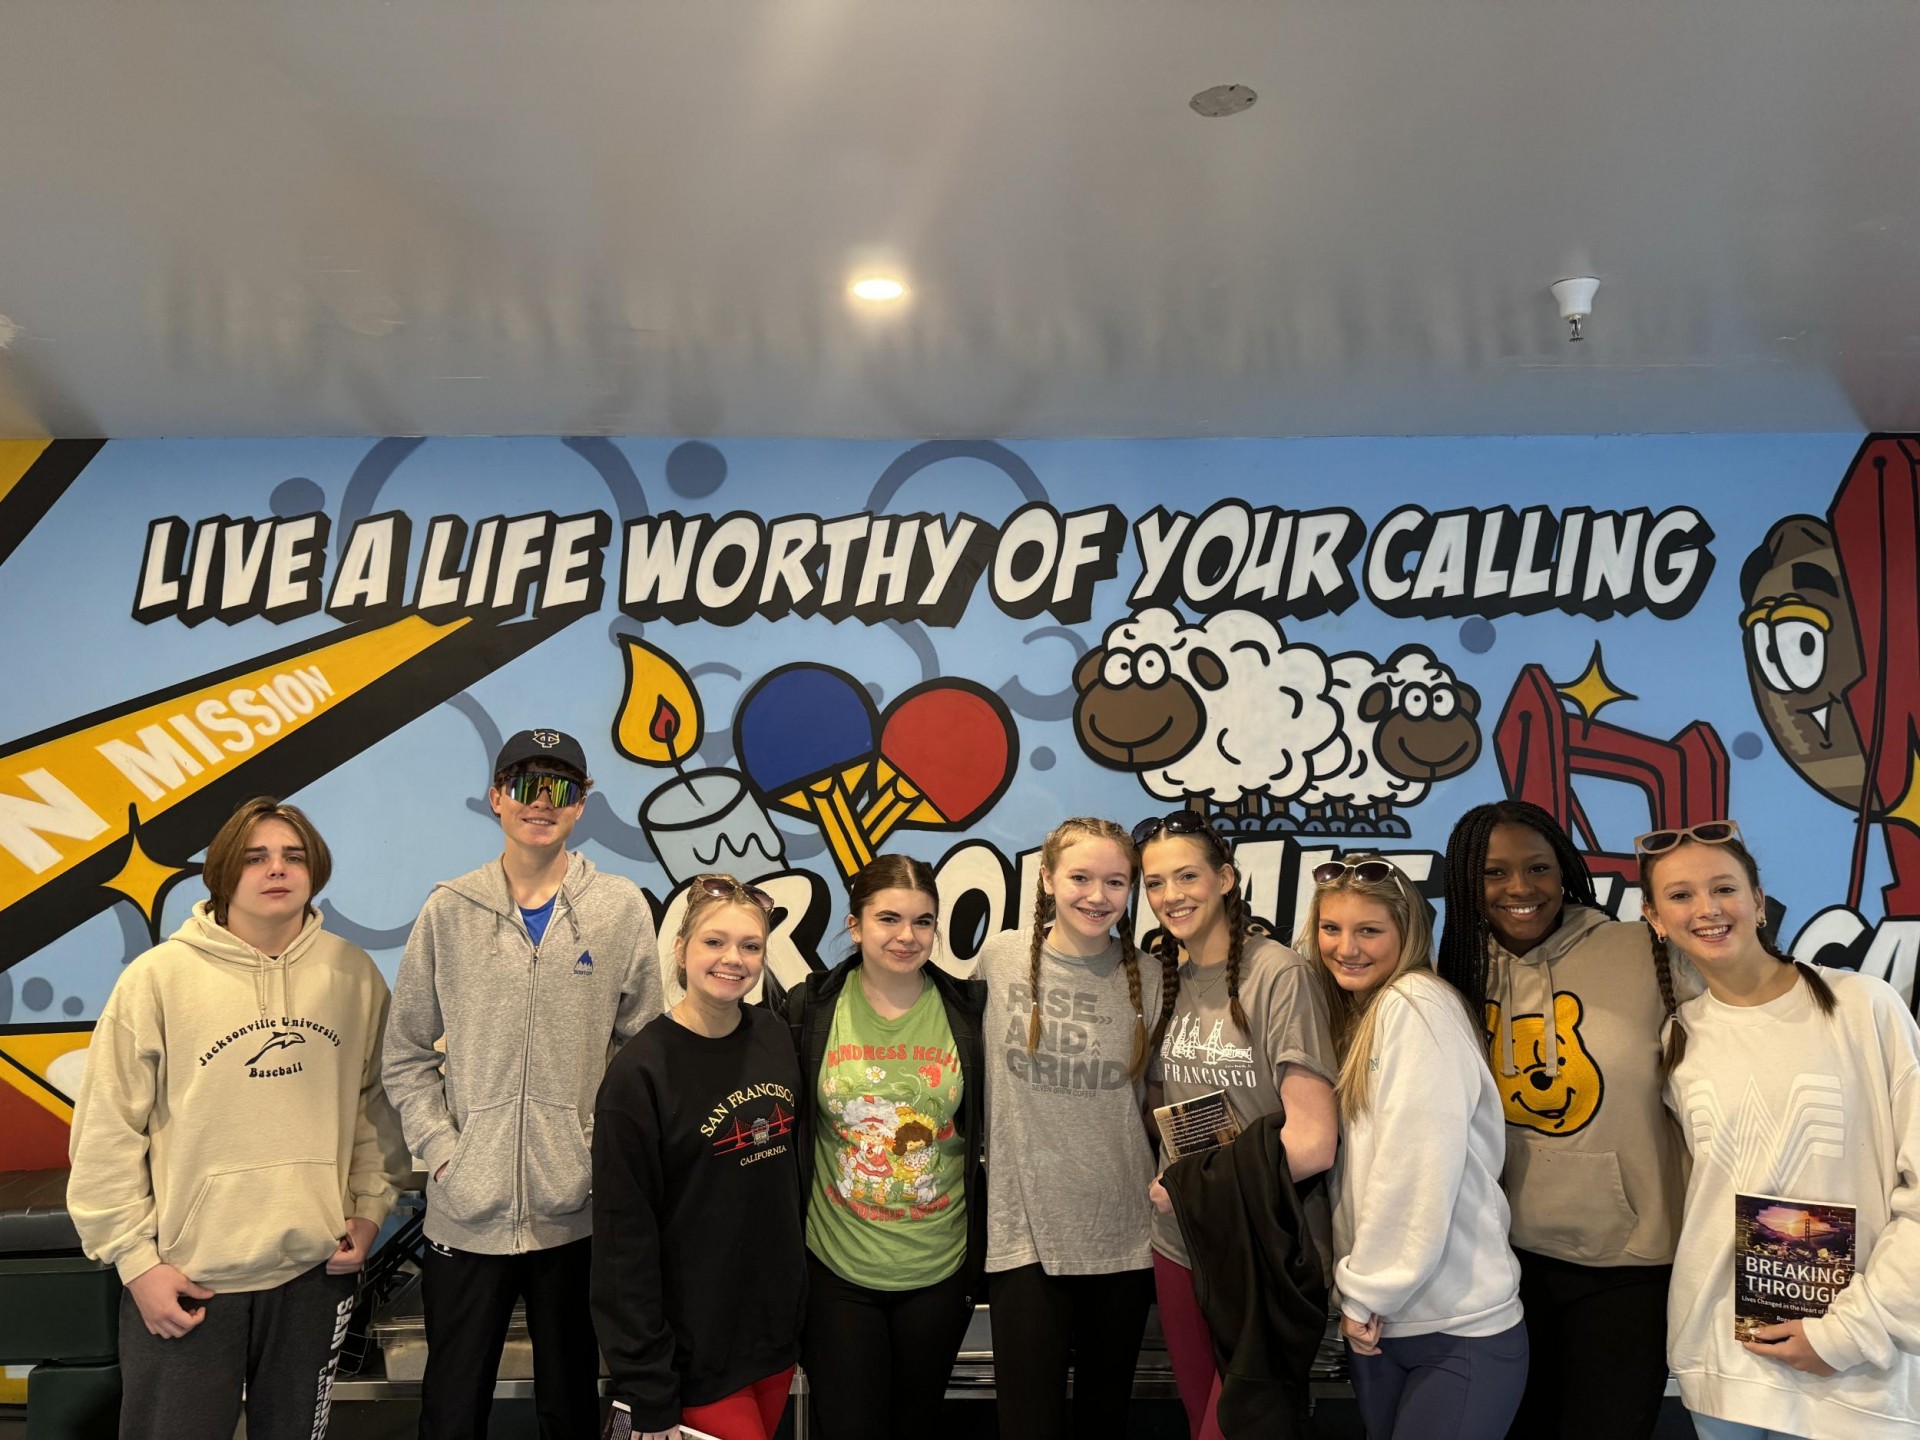 We invite students to join us in our mission, to display Christ through the fulfillment of needs however they present themselves, and change lives in the process.